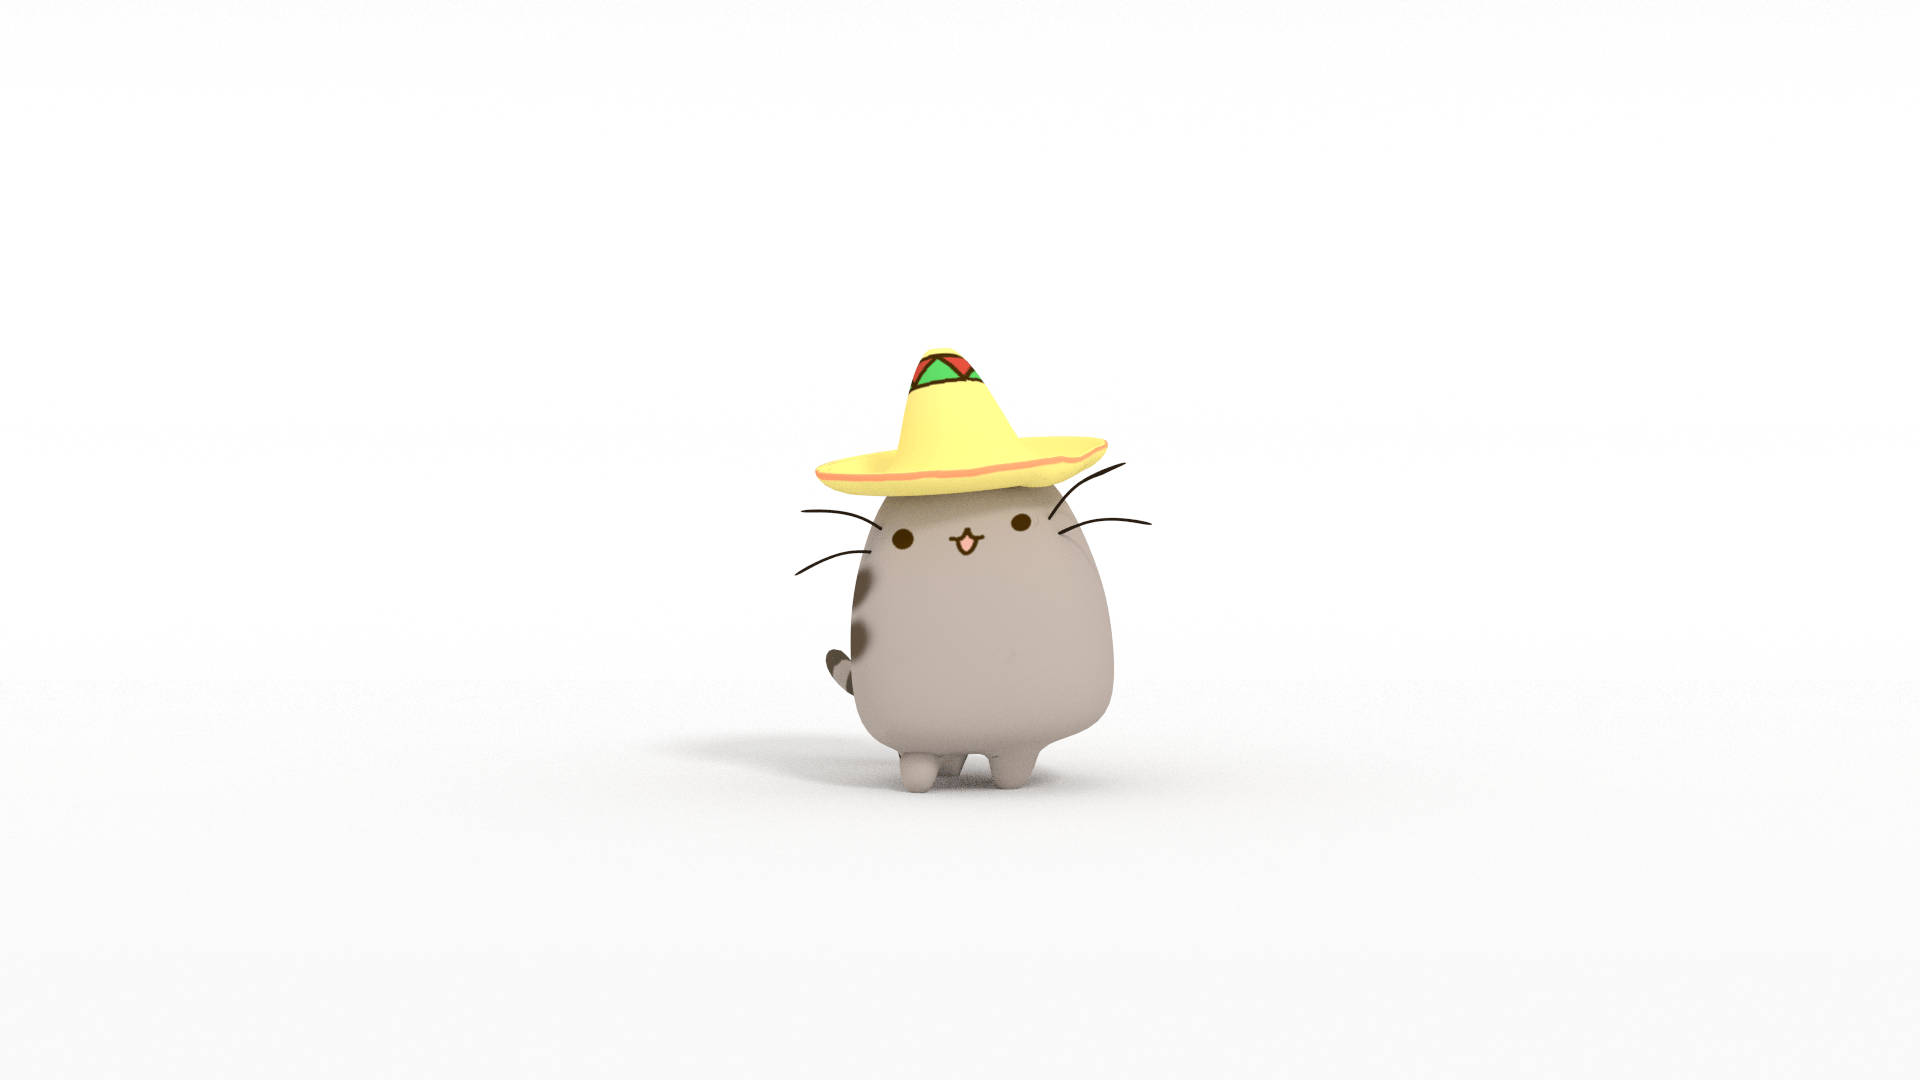 1920X1080 Pusheen Wallpaper and Background